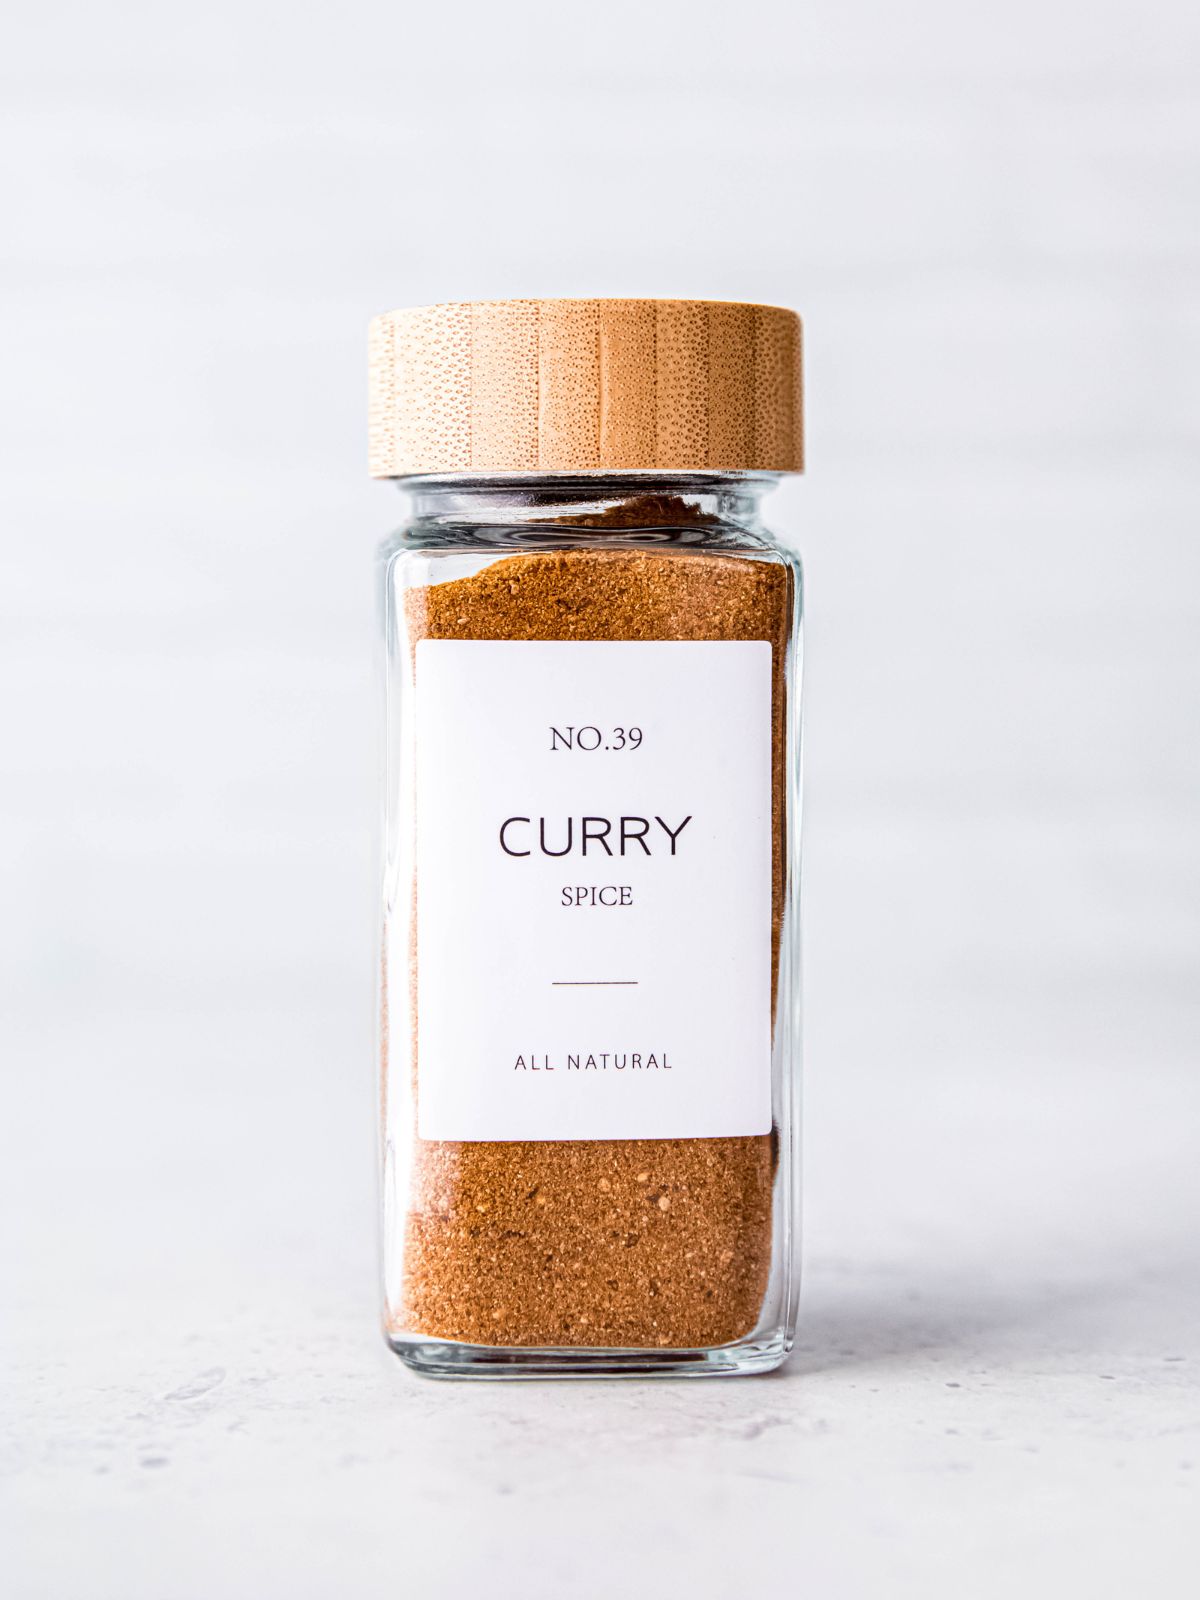 closeup shot of a cute labeled jar of homemade curry spice powder.